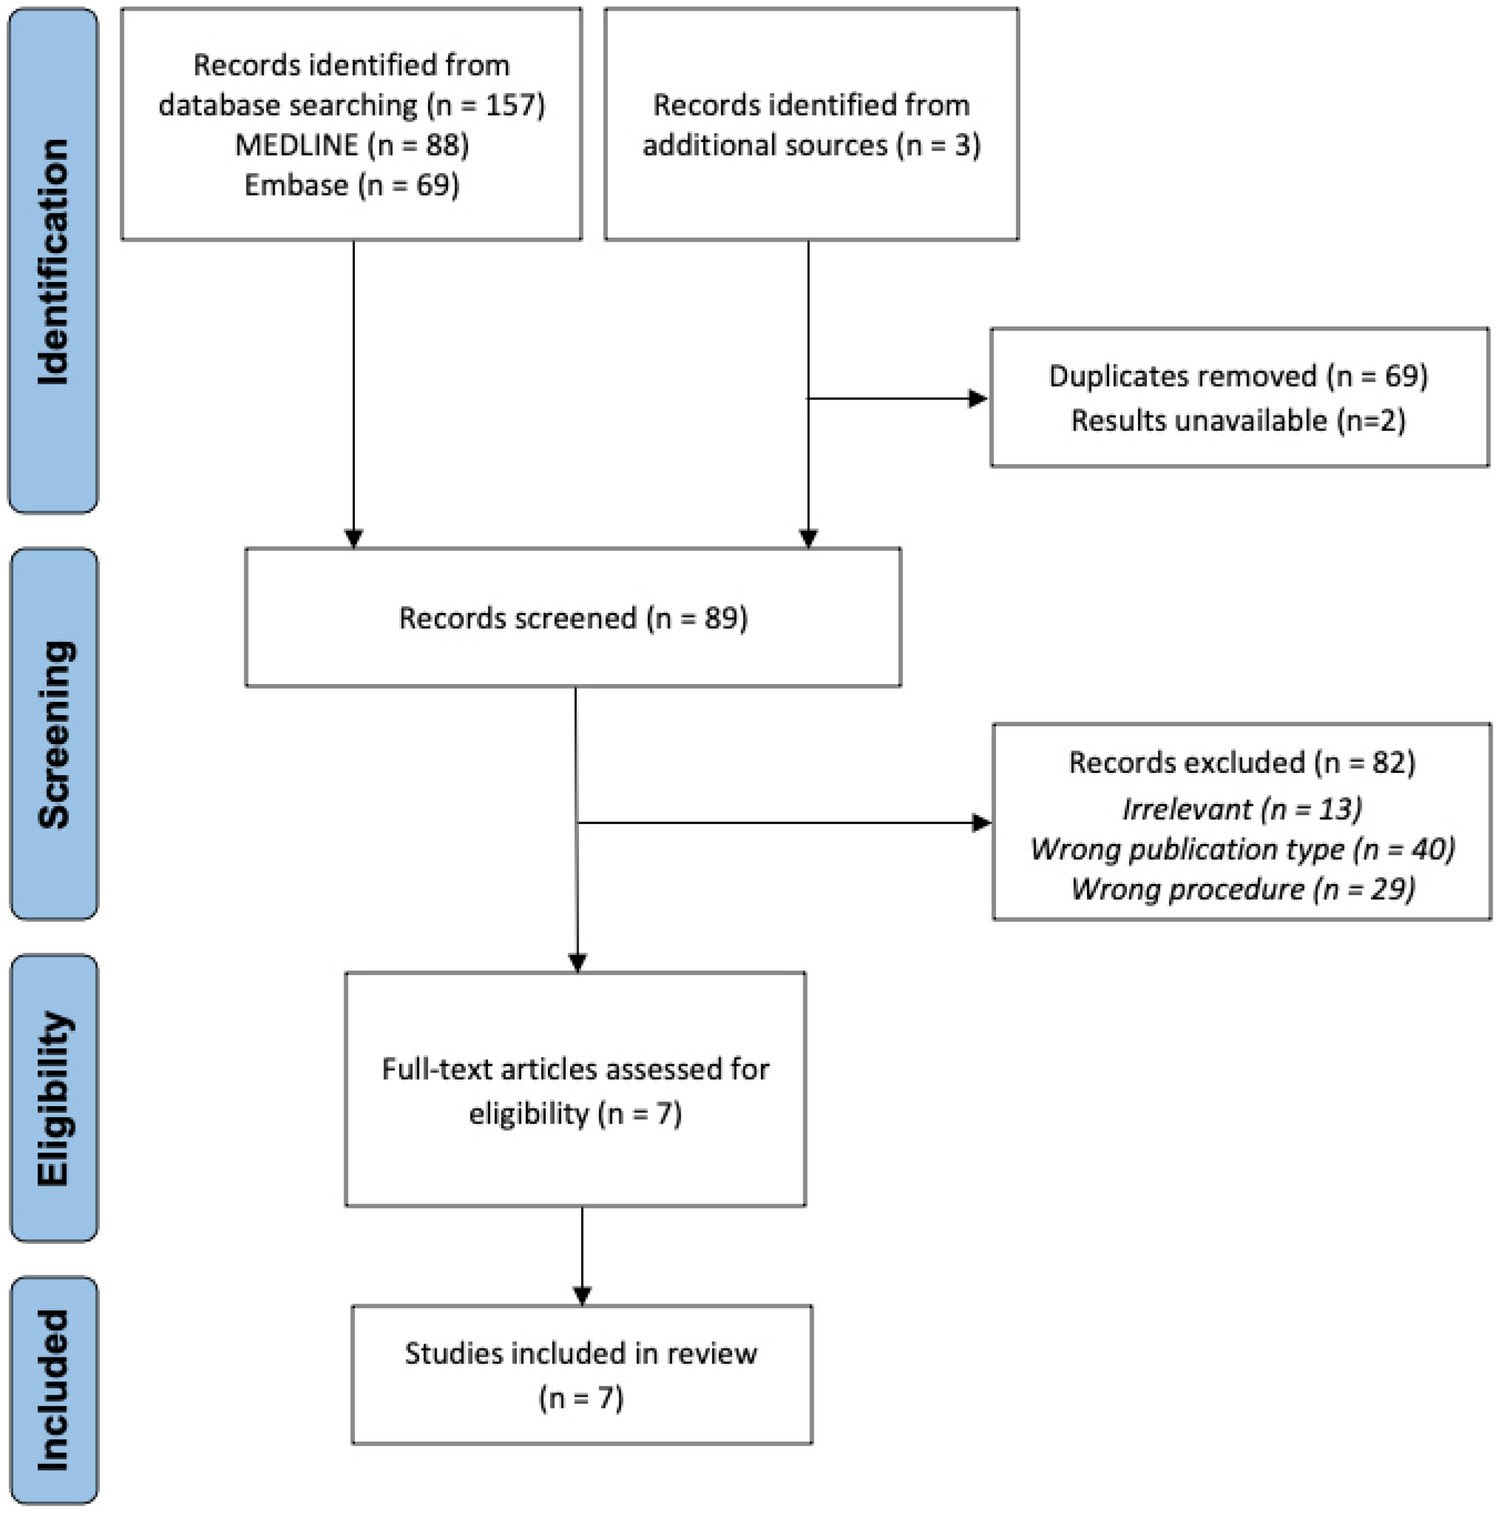 Analgesic effect of local anaesthetic in haemorrhoid banding: systematic review and meta-analysis